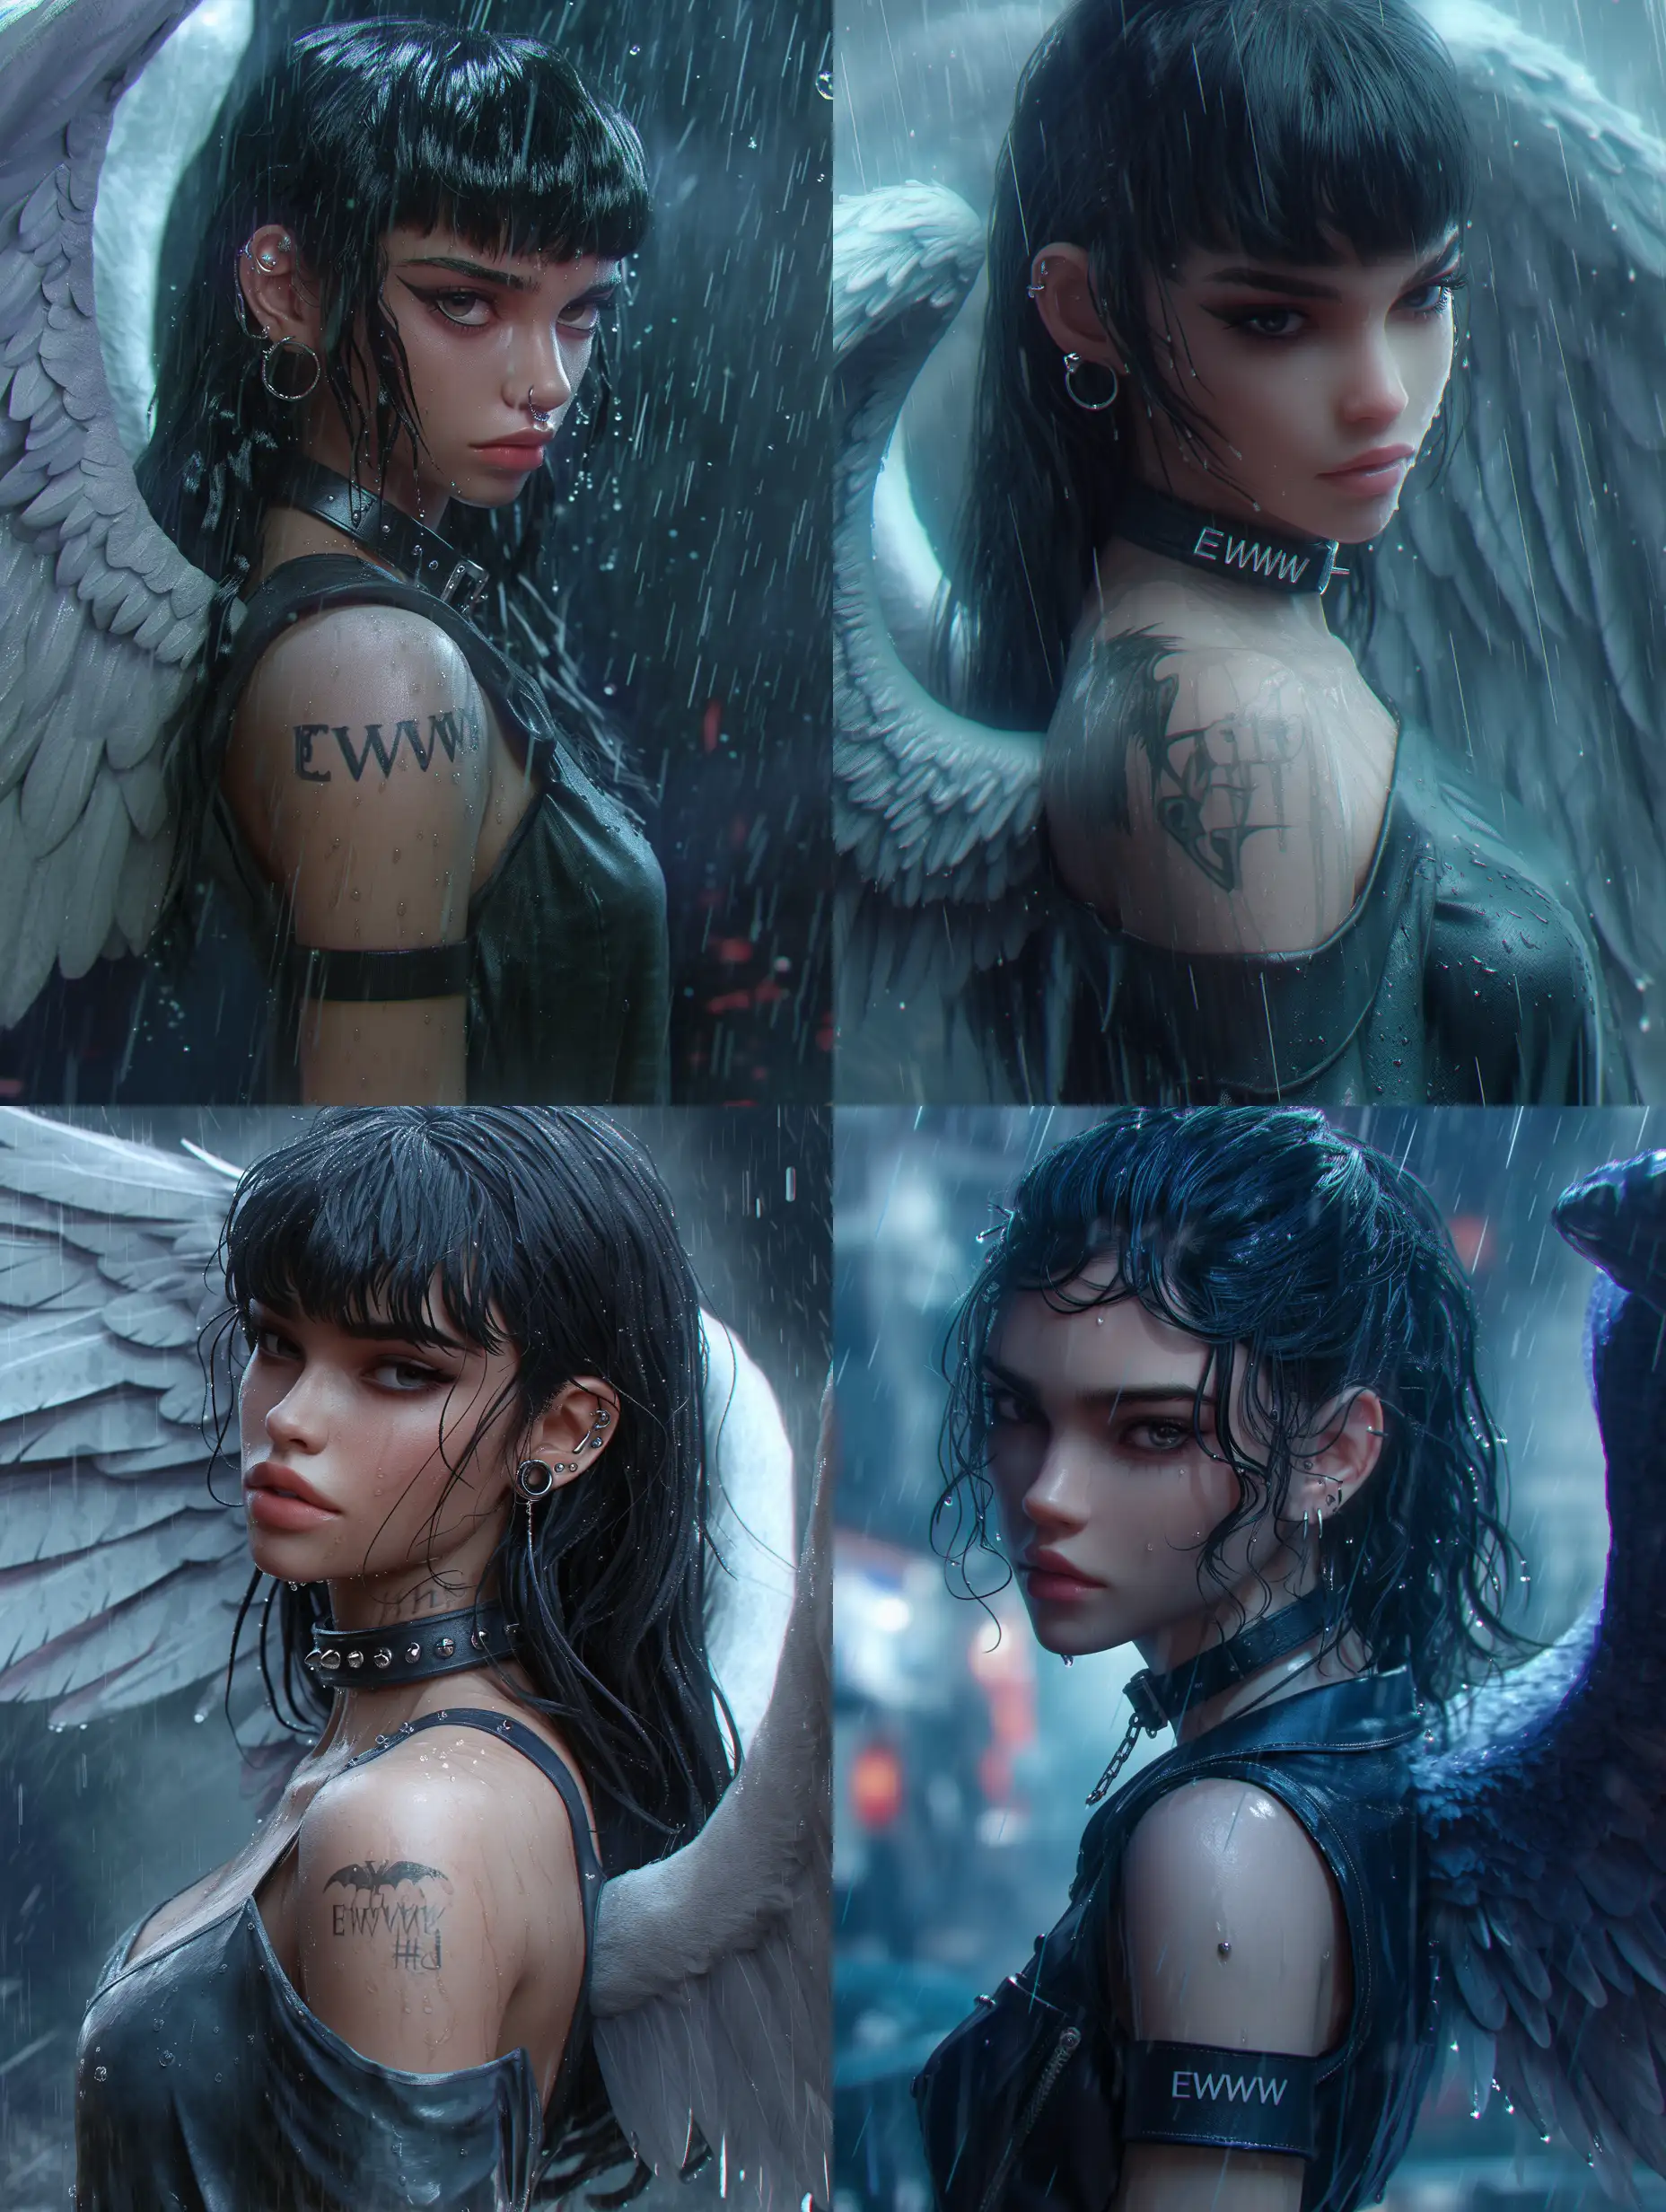 side view, look to the viewer, 3D character, stunning Zendaya, angel wings, black hair, piercing, collar with the inscription "EWW", standing in rain, 3D render, ultra realistic skin, CGI VFX fine art, ZBrush HDR | dark shadows | ambient occlusion | high resolution | intricate | hyperrealistic textures, rain background. :: anime::-0.1 --niji 6 --s 250